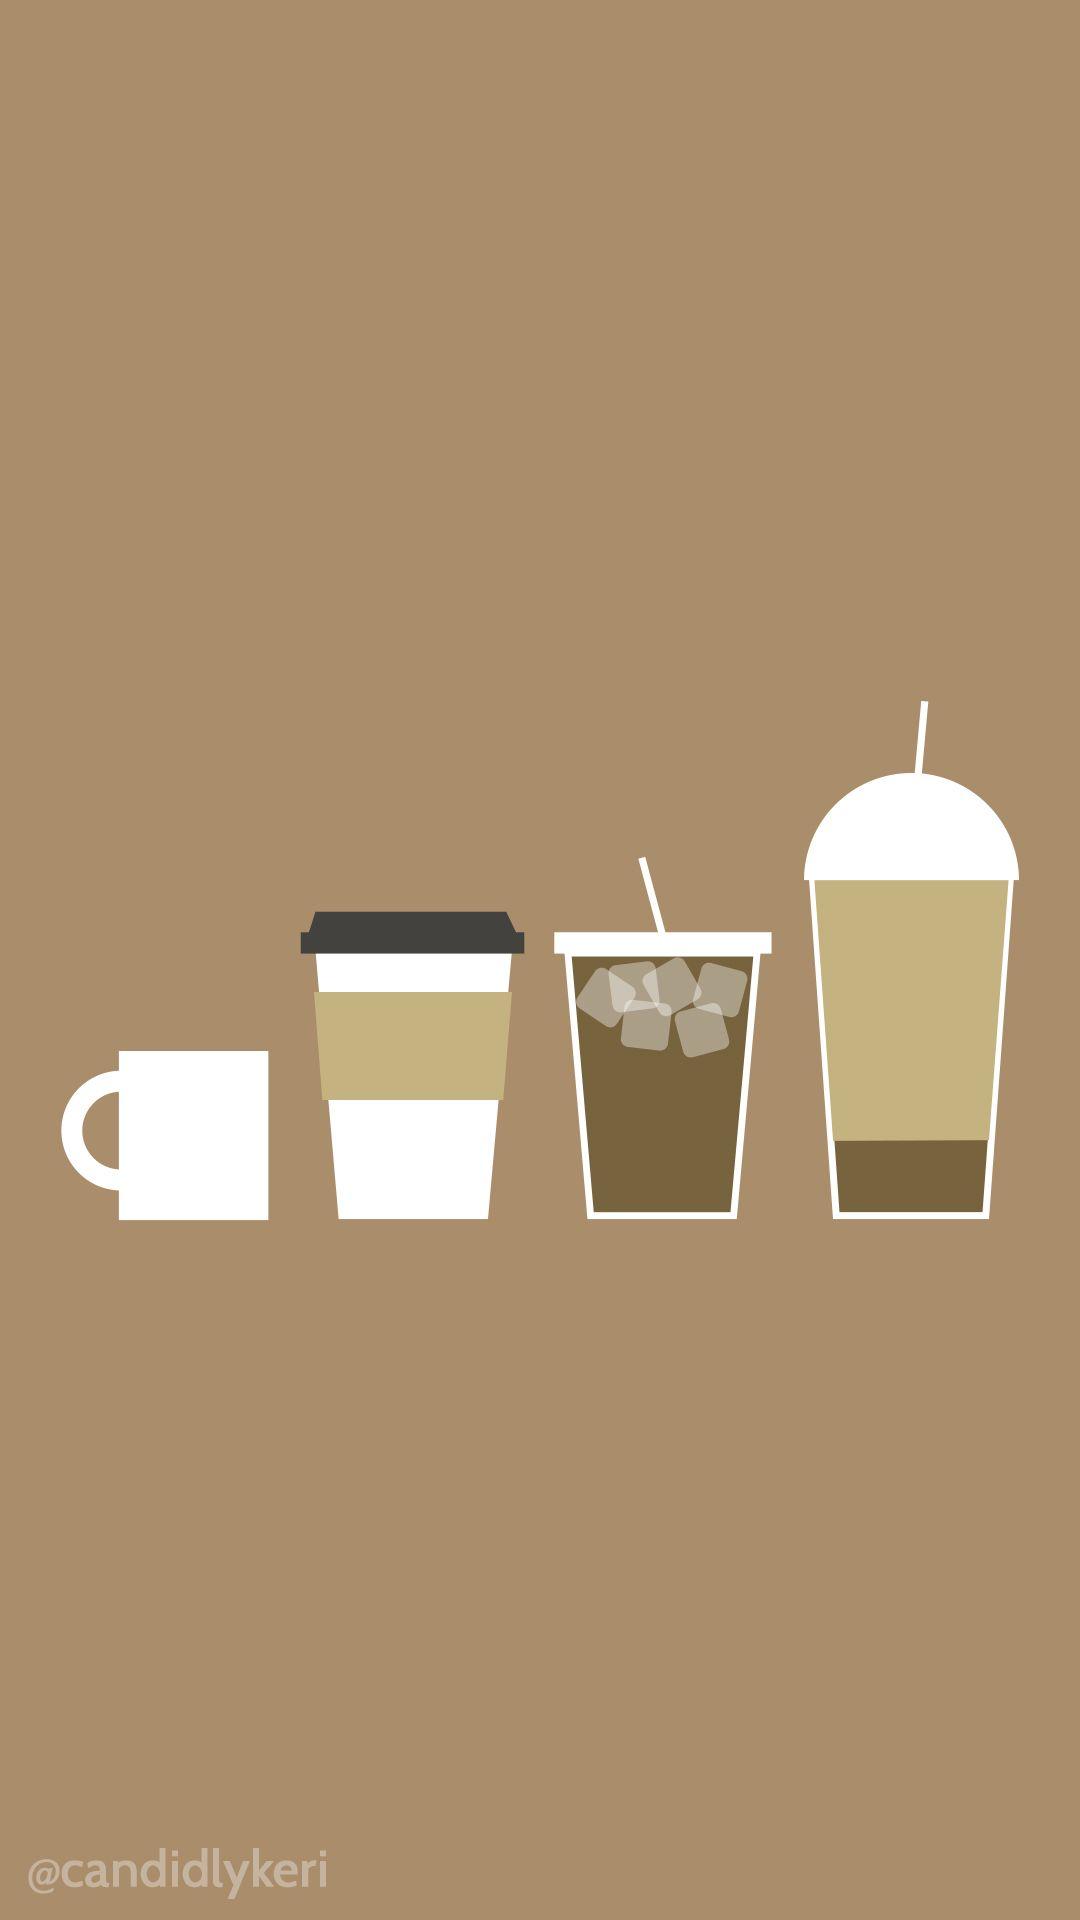 Cute cartoon coffee, latte, iced coffee wallpaper you can download